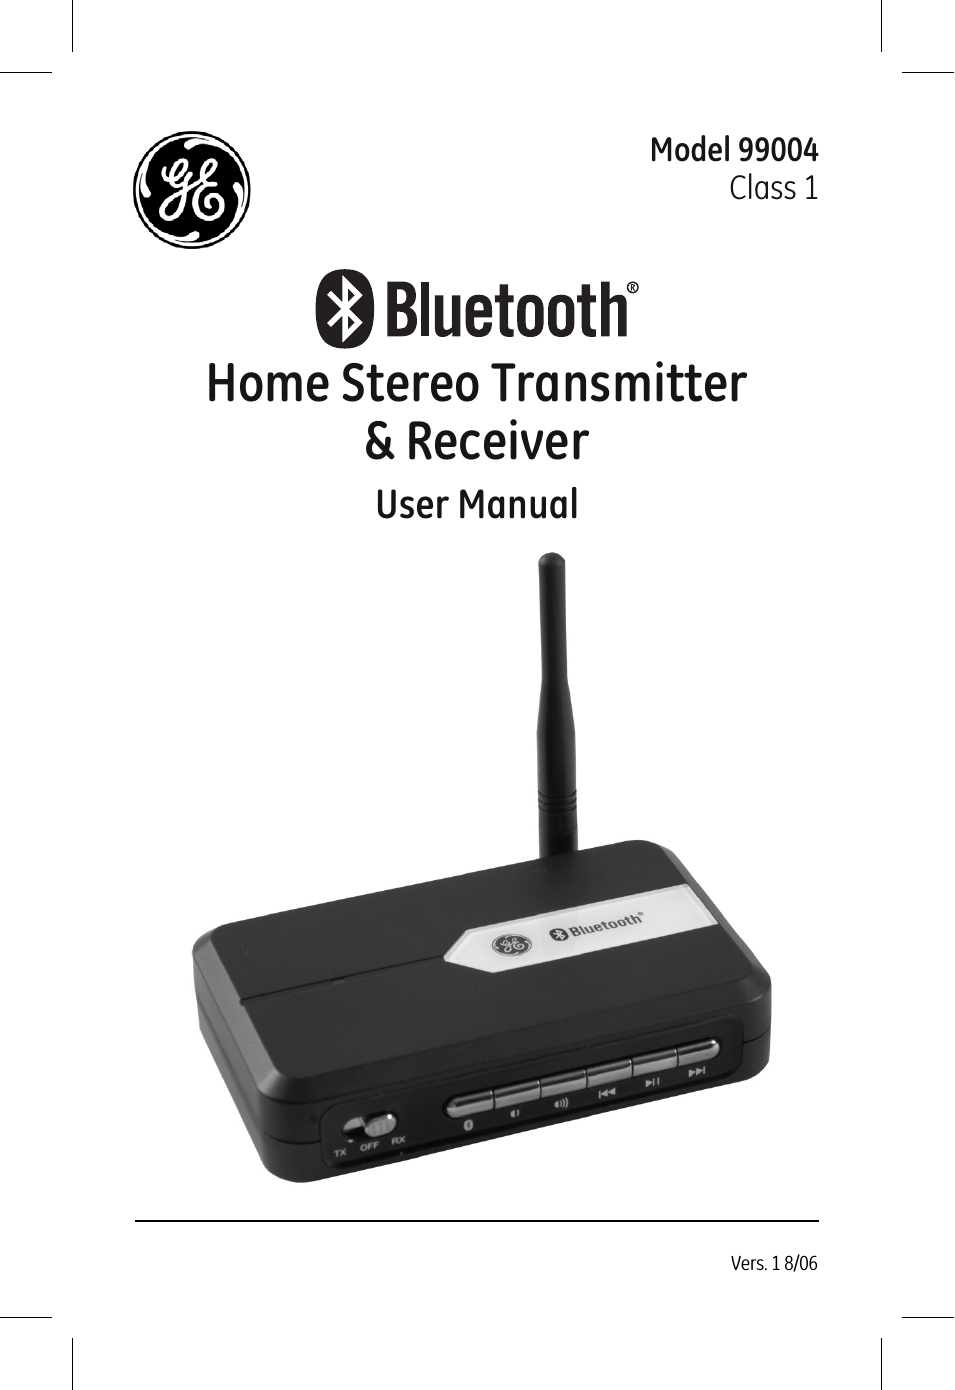 99004 GE Bluetooth Home Stereo Transmitter and Receiver